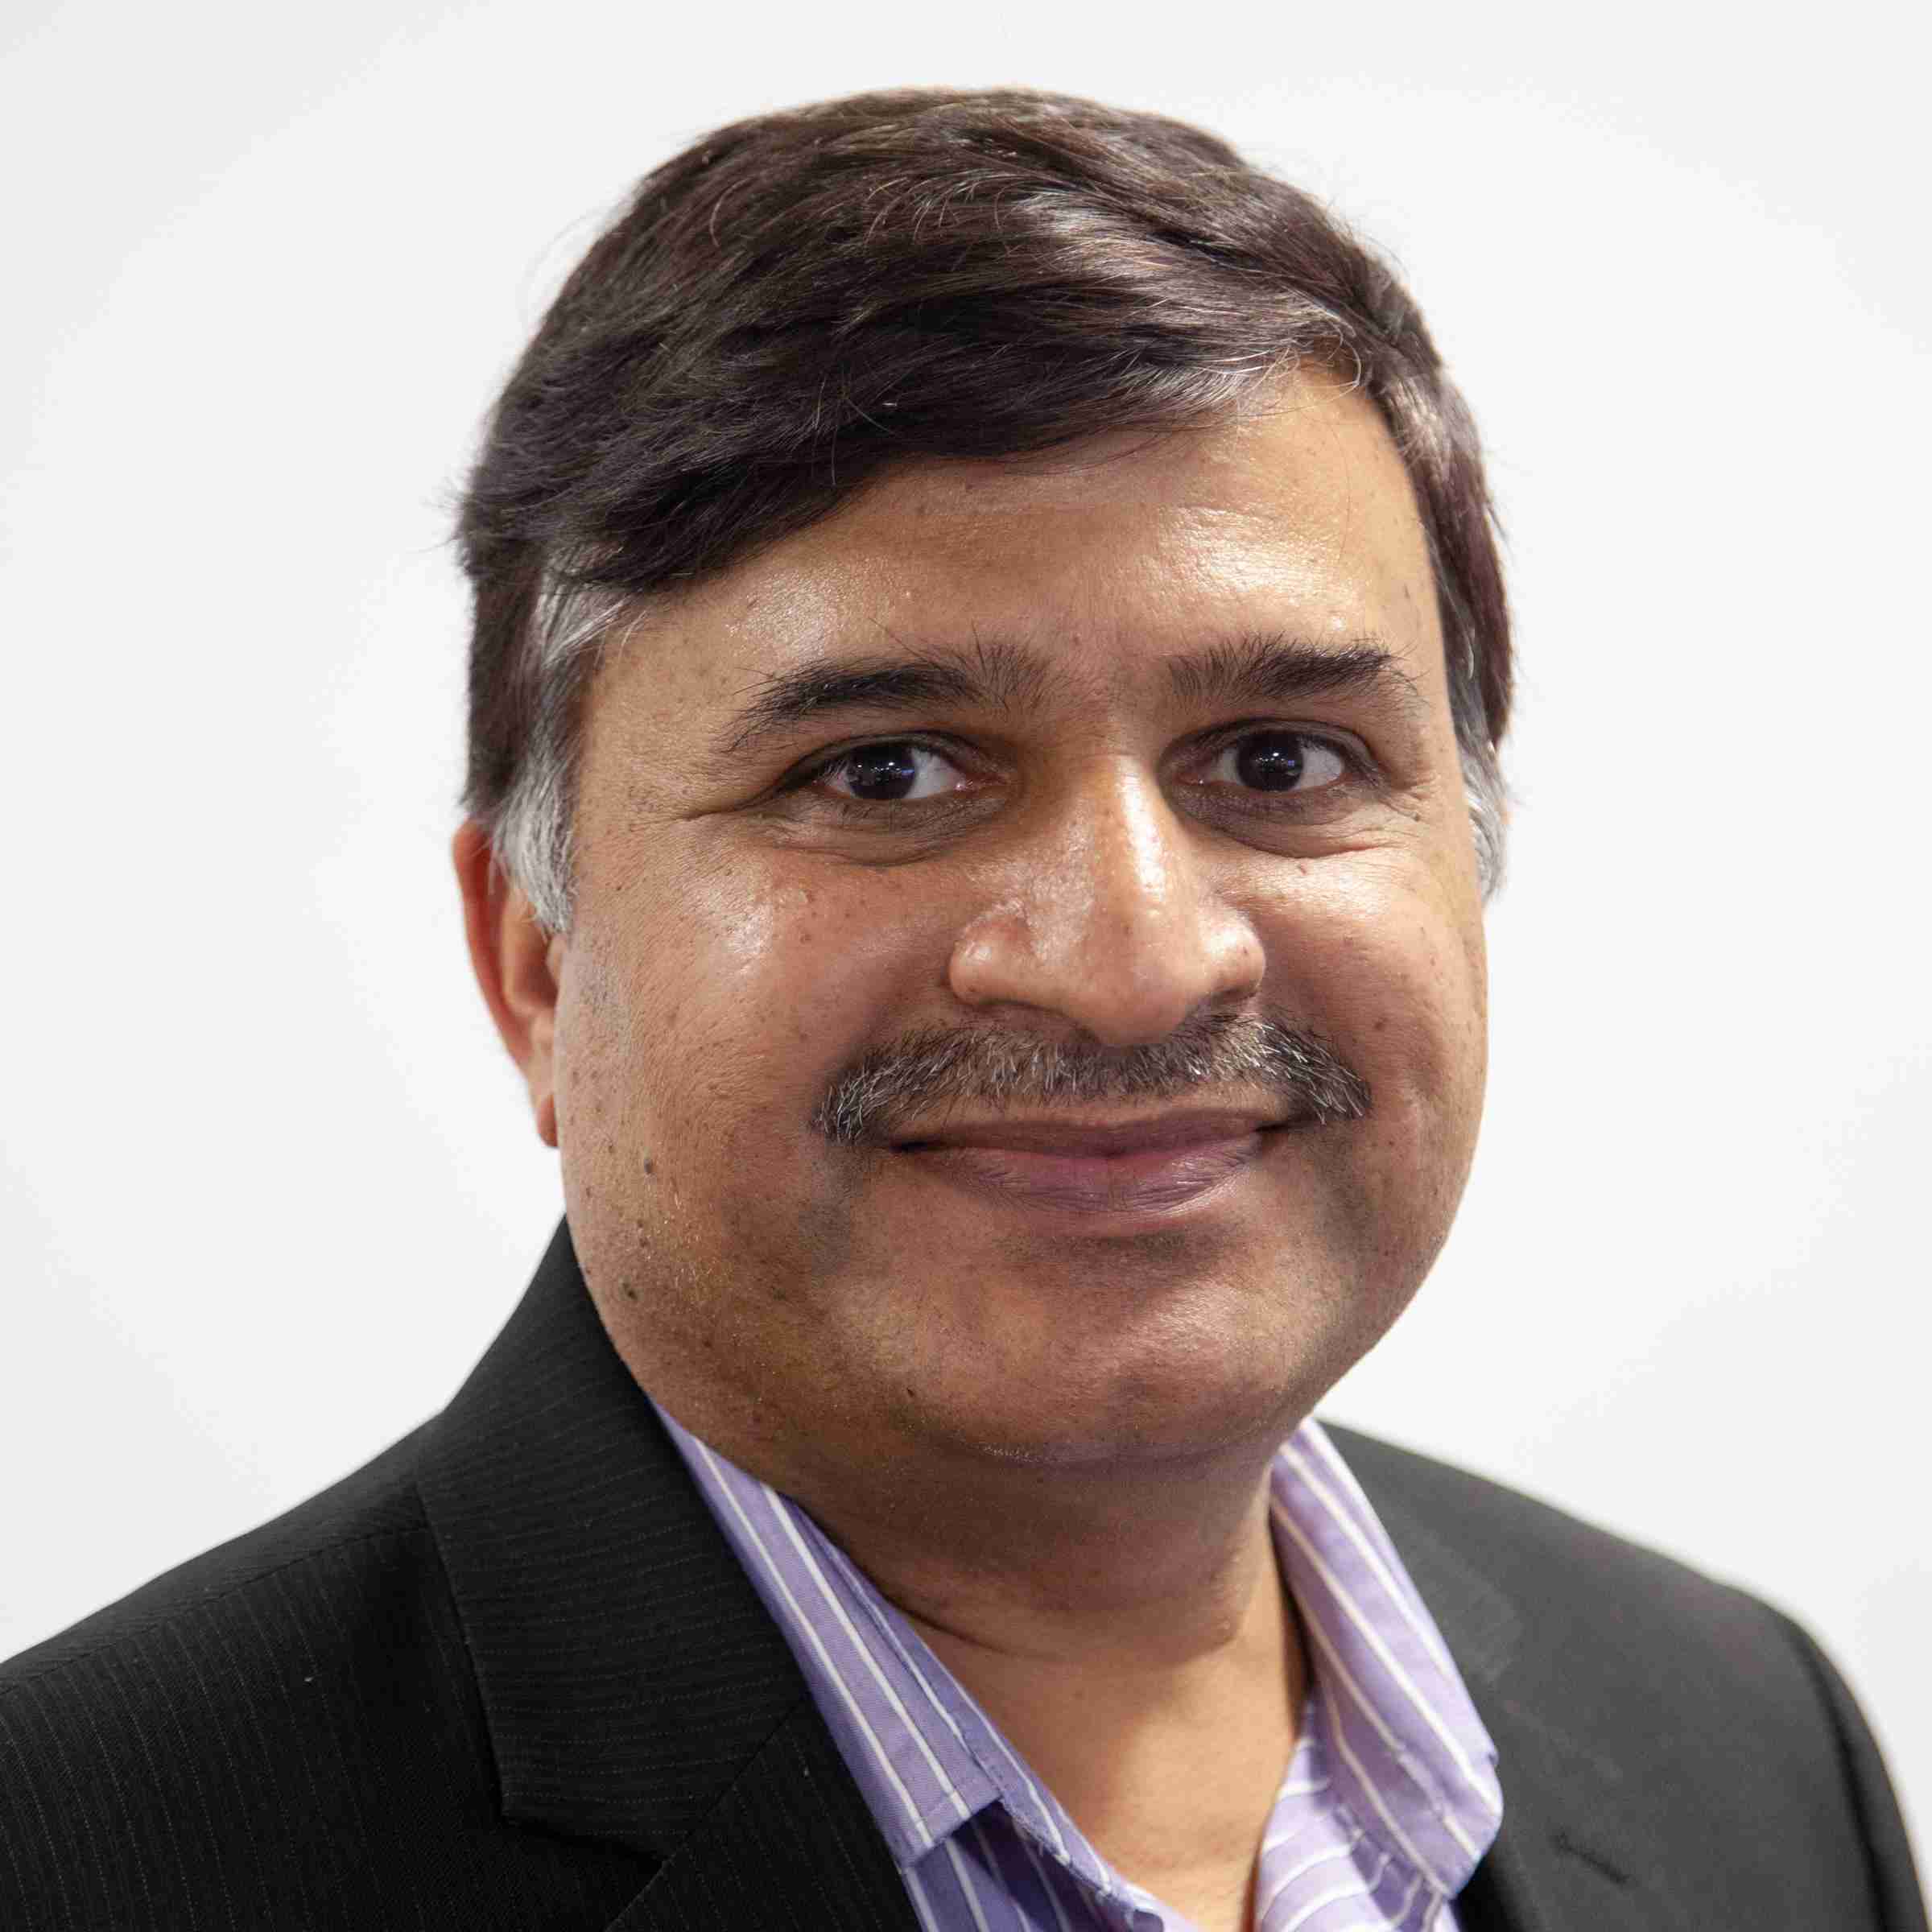 Profile image of Dr Anil Kashyap